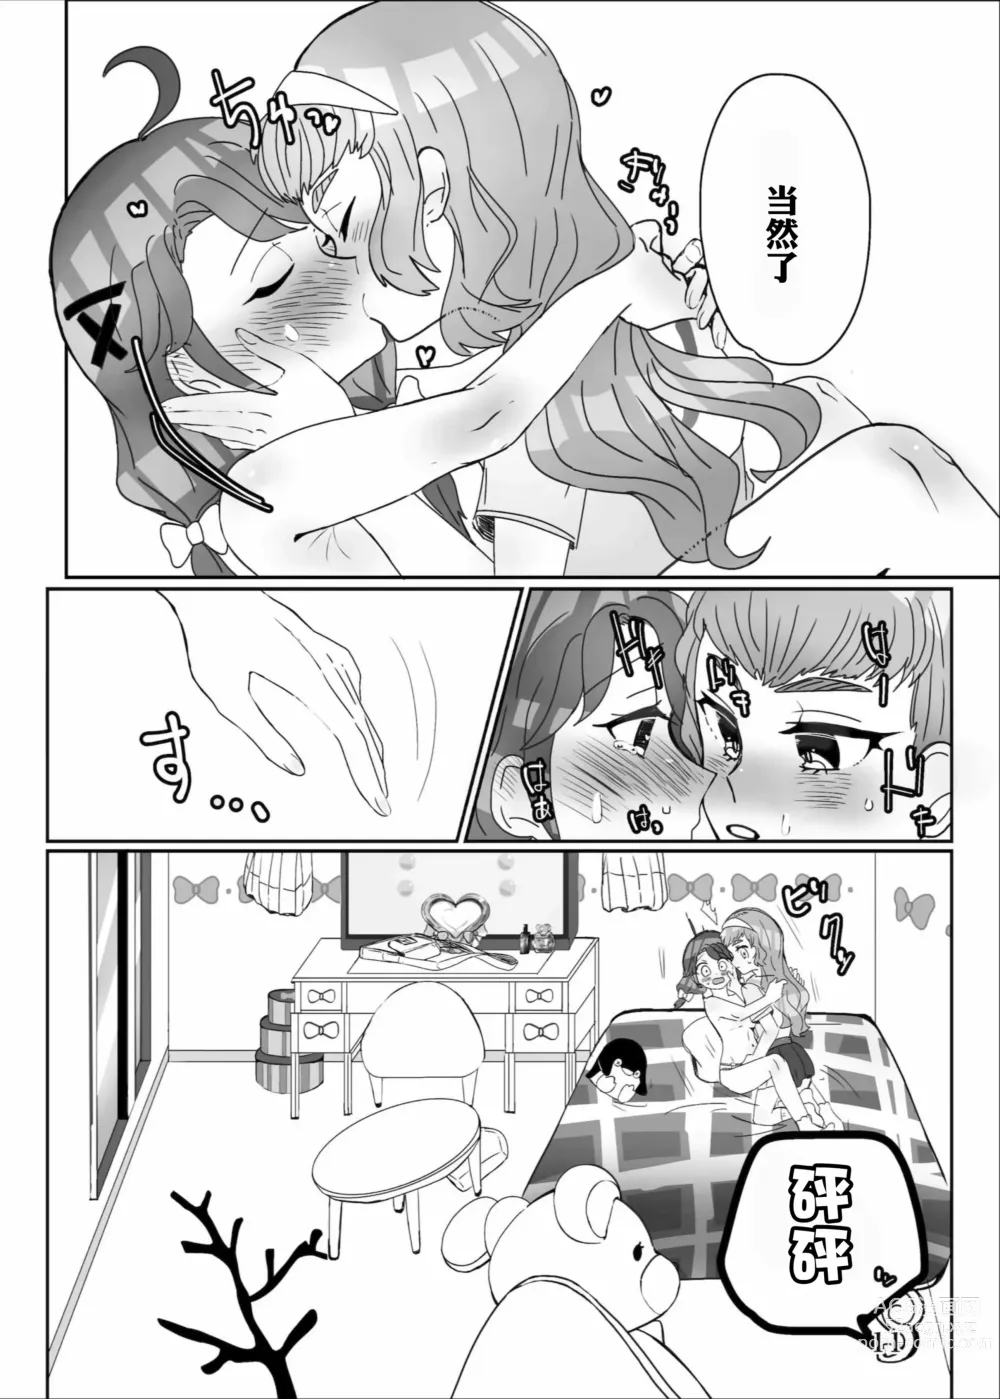 Page 13 of doujinshi 想做能干的孩子♪ DO MY BEST!